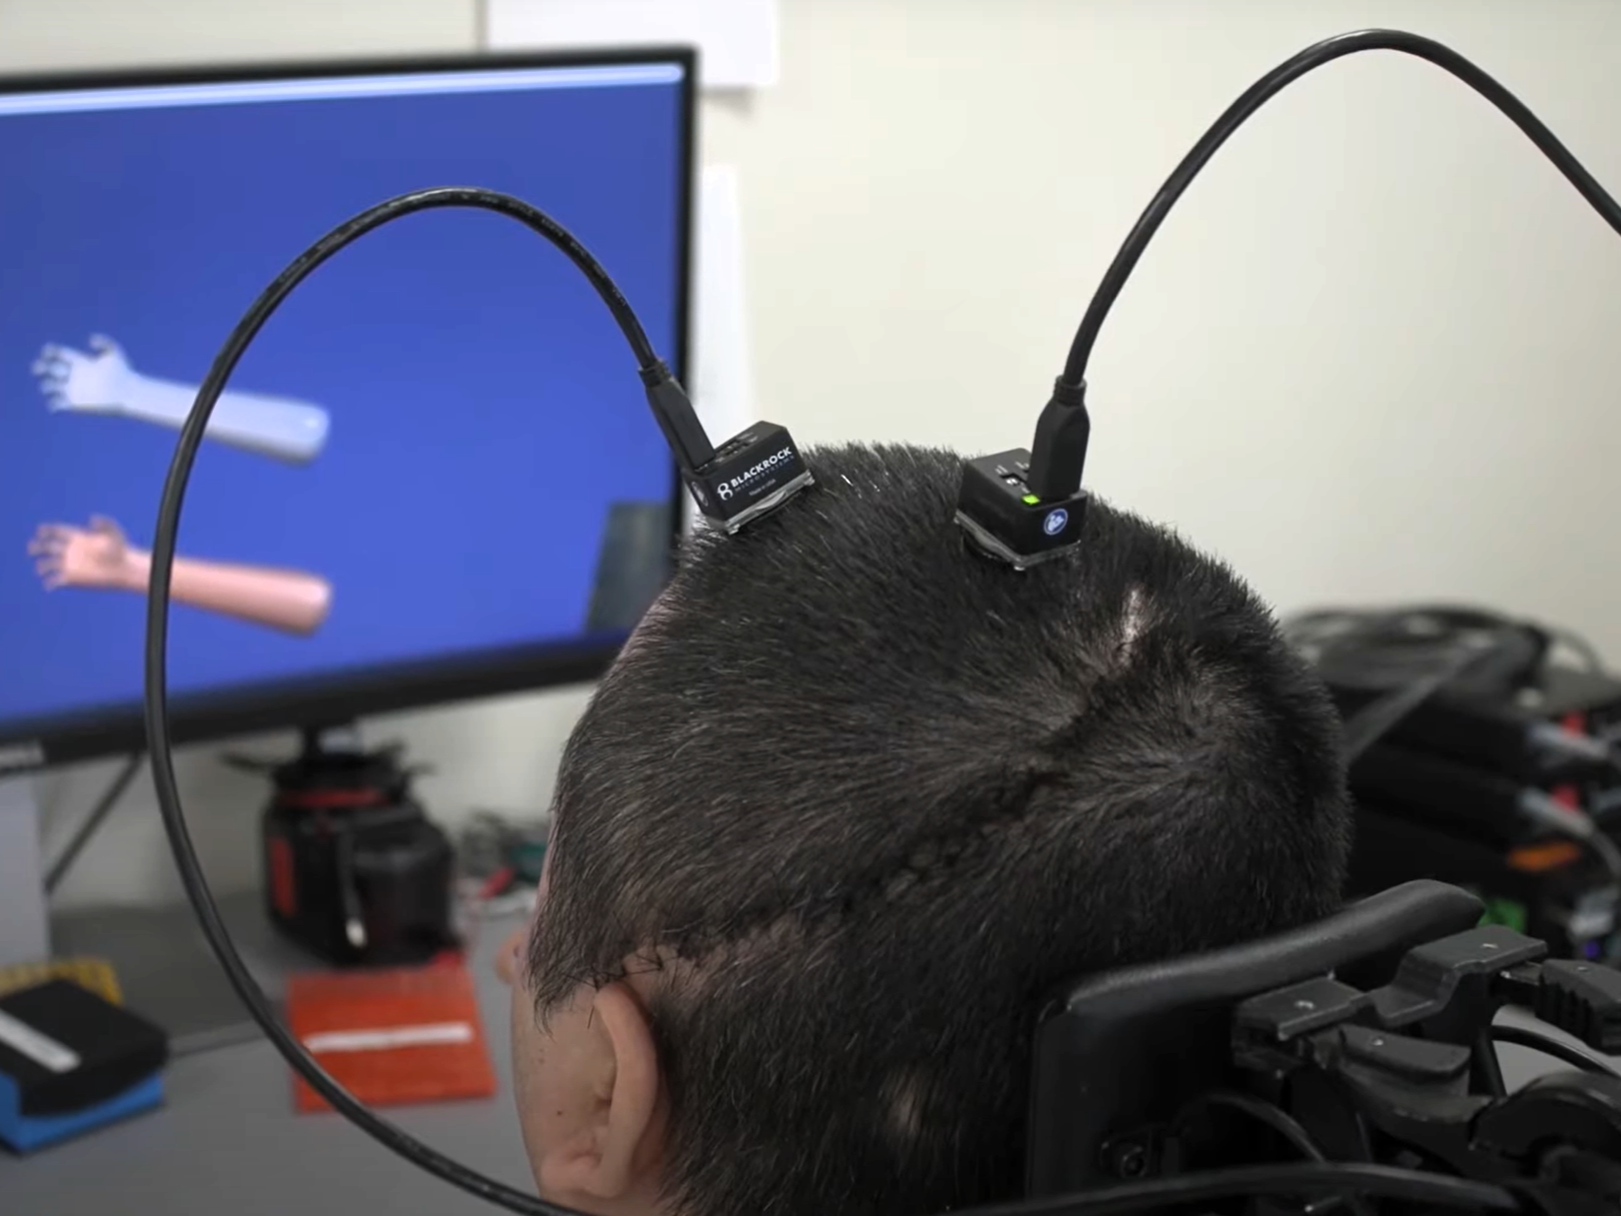 Researchers restored the sense of touch and movement for Keith Thomas using brain implants, artificial intelligence and novel stimulation technology